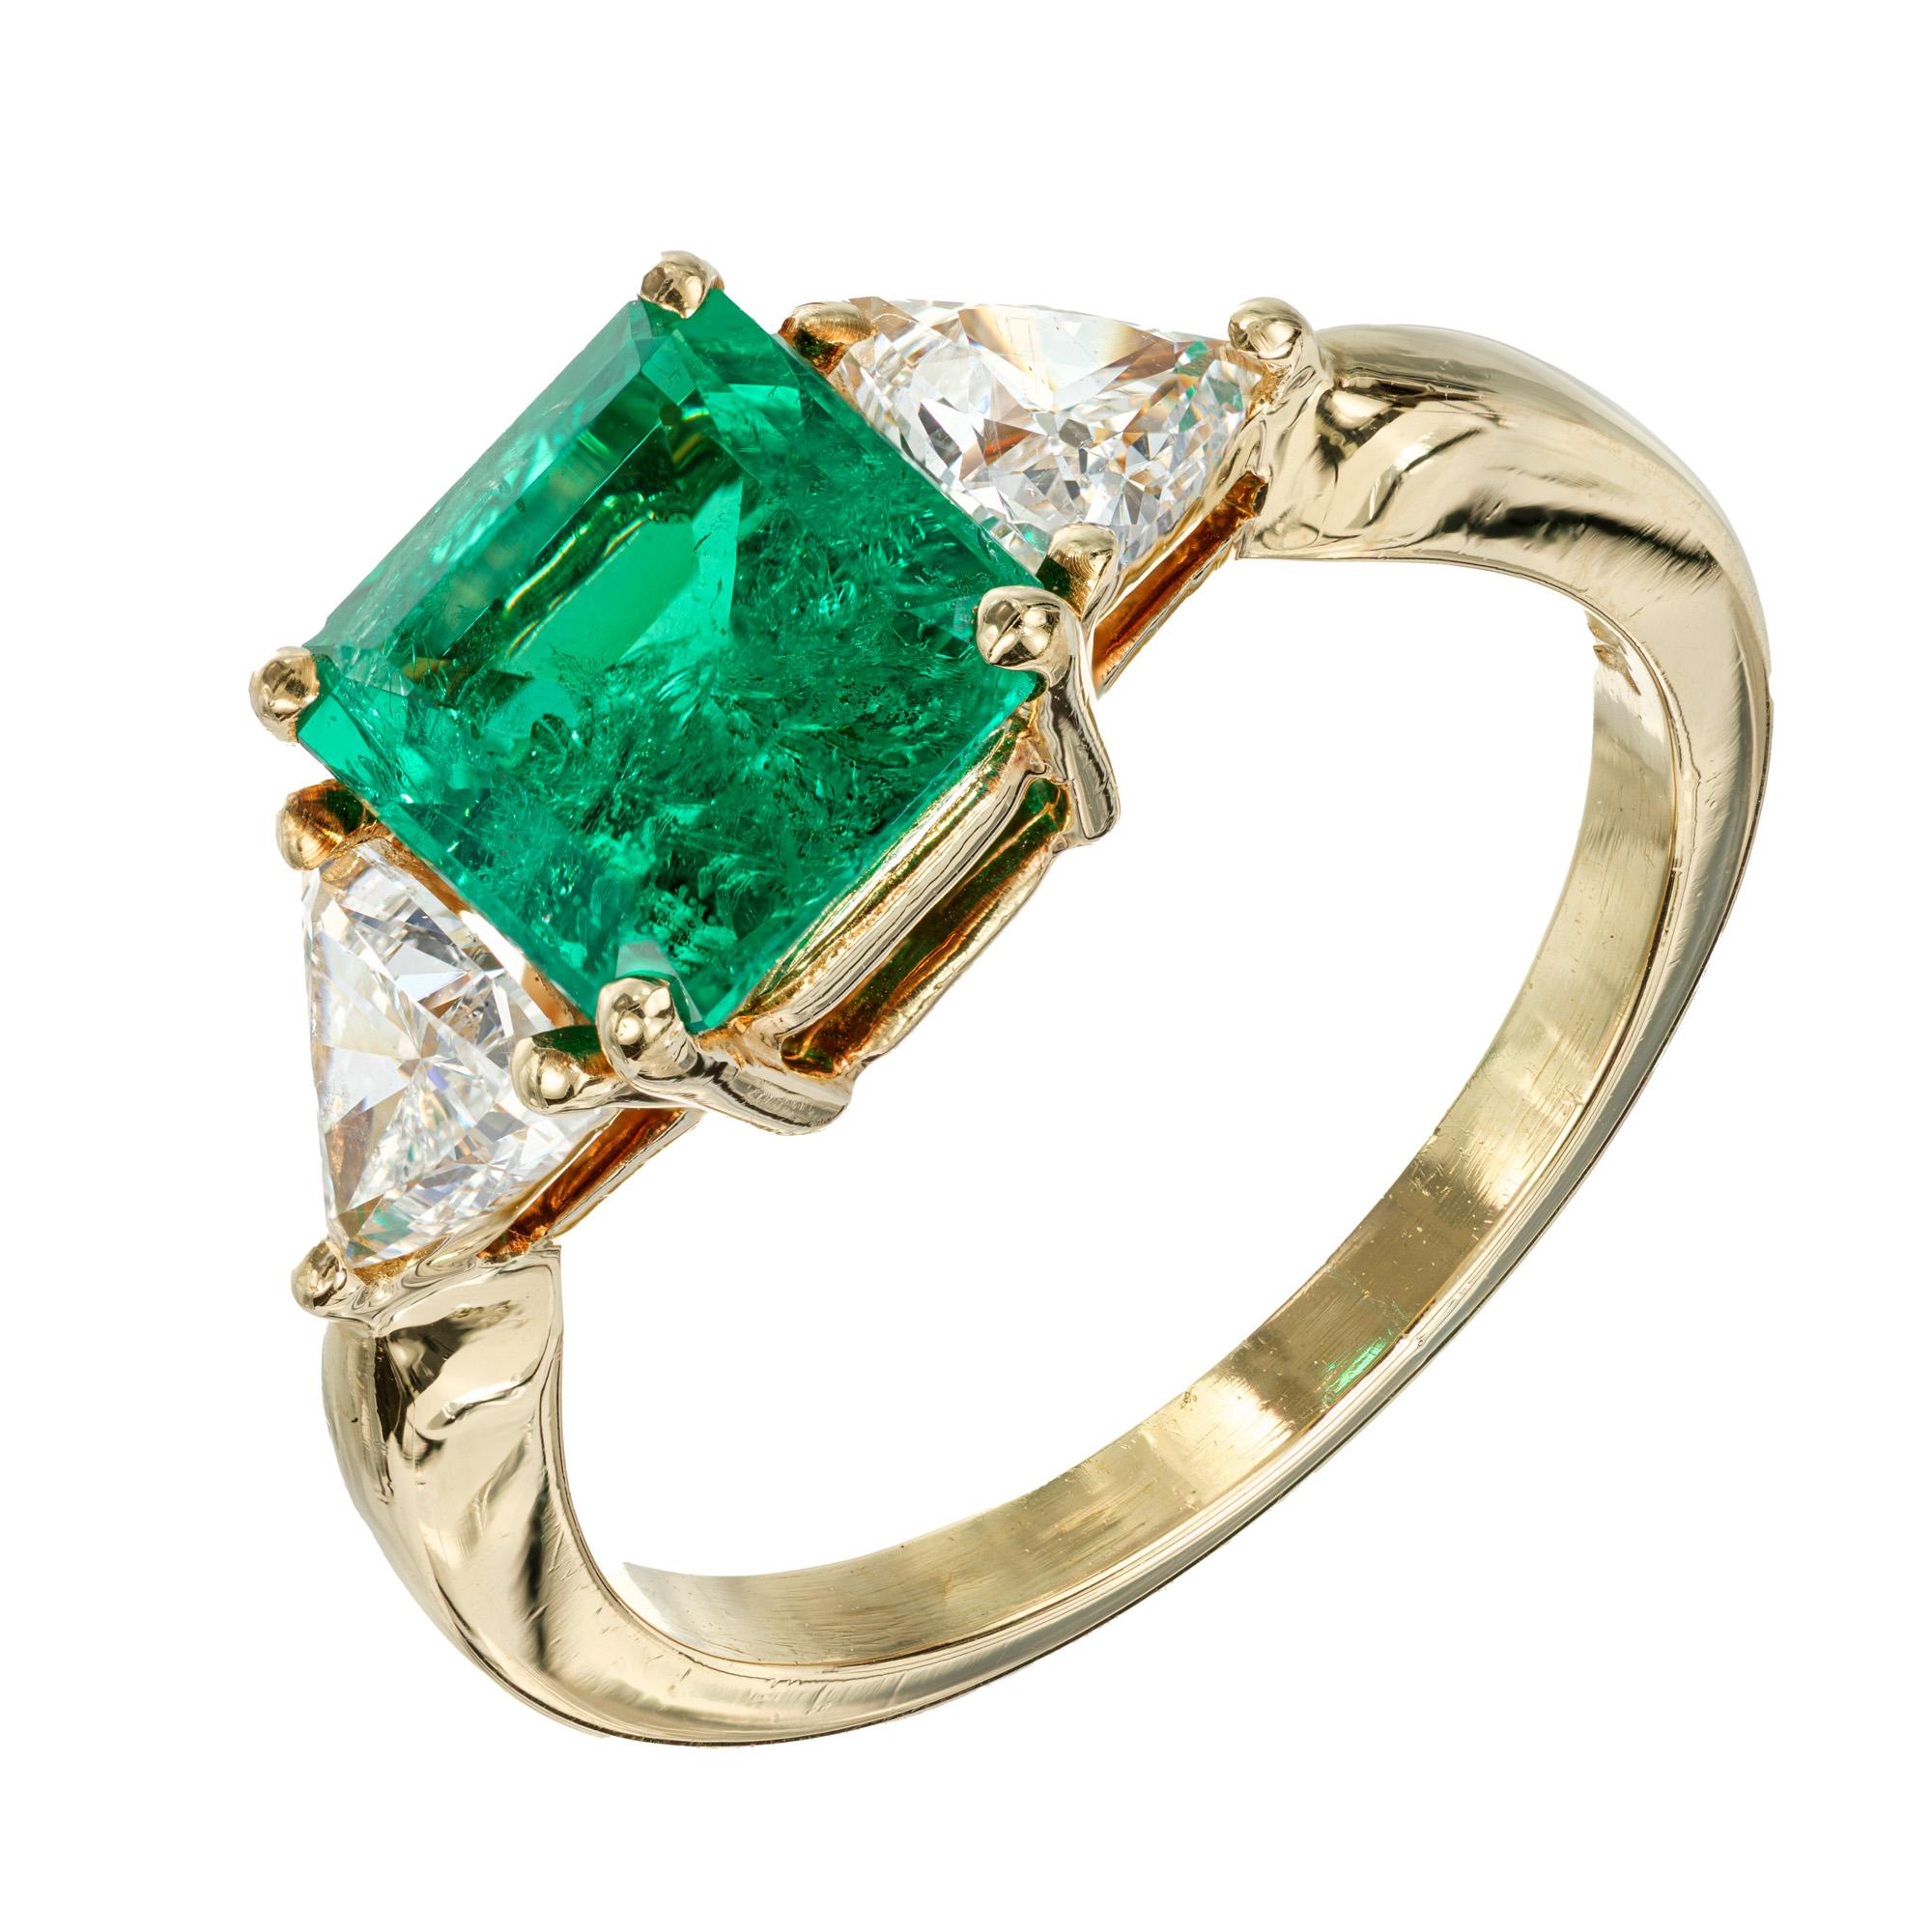 1960's Emerald step cut Emerald and trilliant cut diamond, engagement ring. GIA certified center Emerald set in a 18k yellow gold setting with 2 trilliant side diamonds. 

1 top gem Emerald cut Columbian green Emerald, approx. total weight 1.60cts,